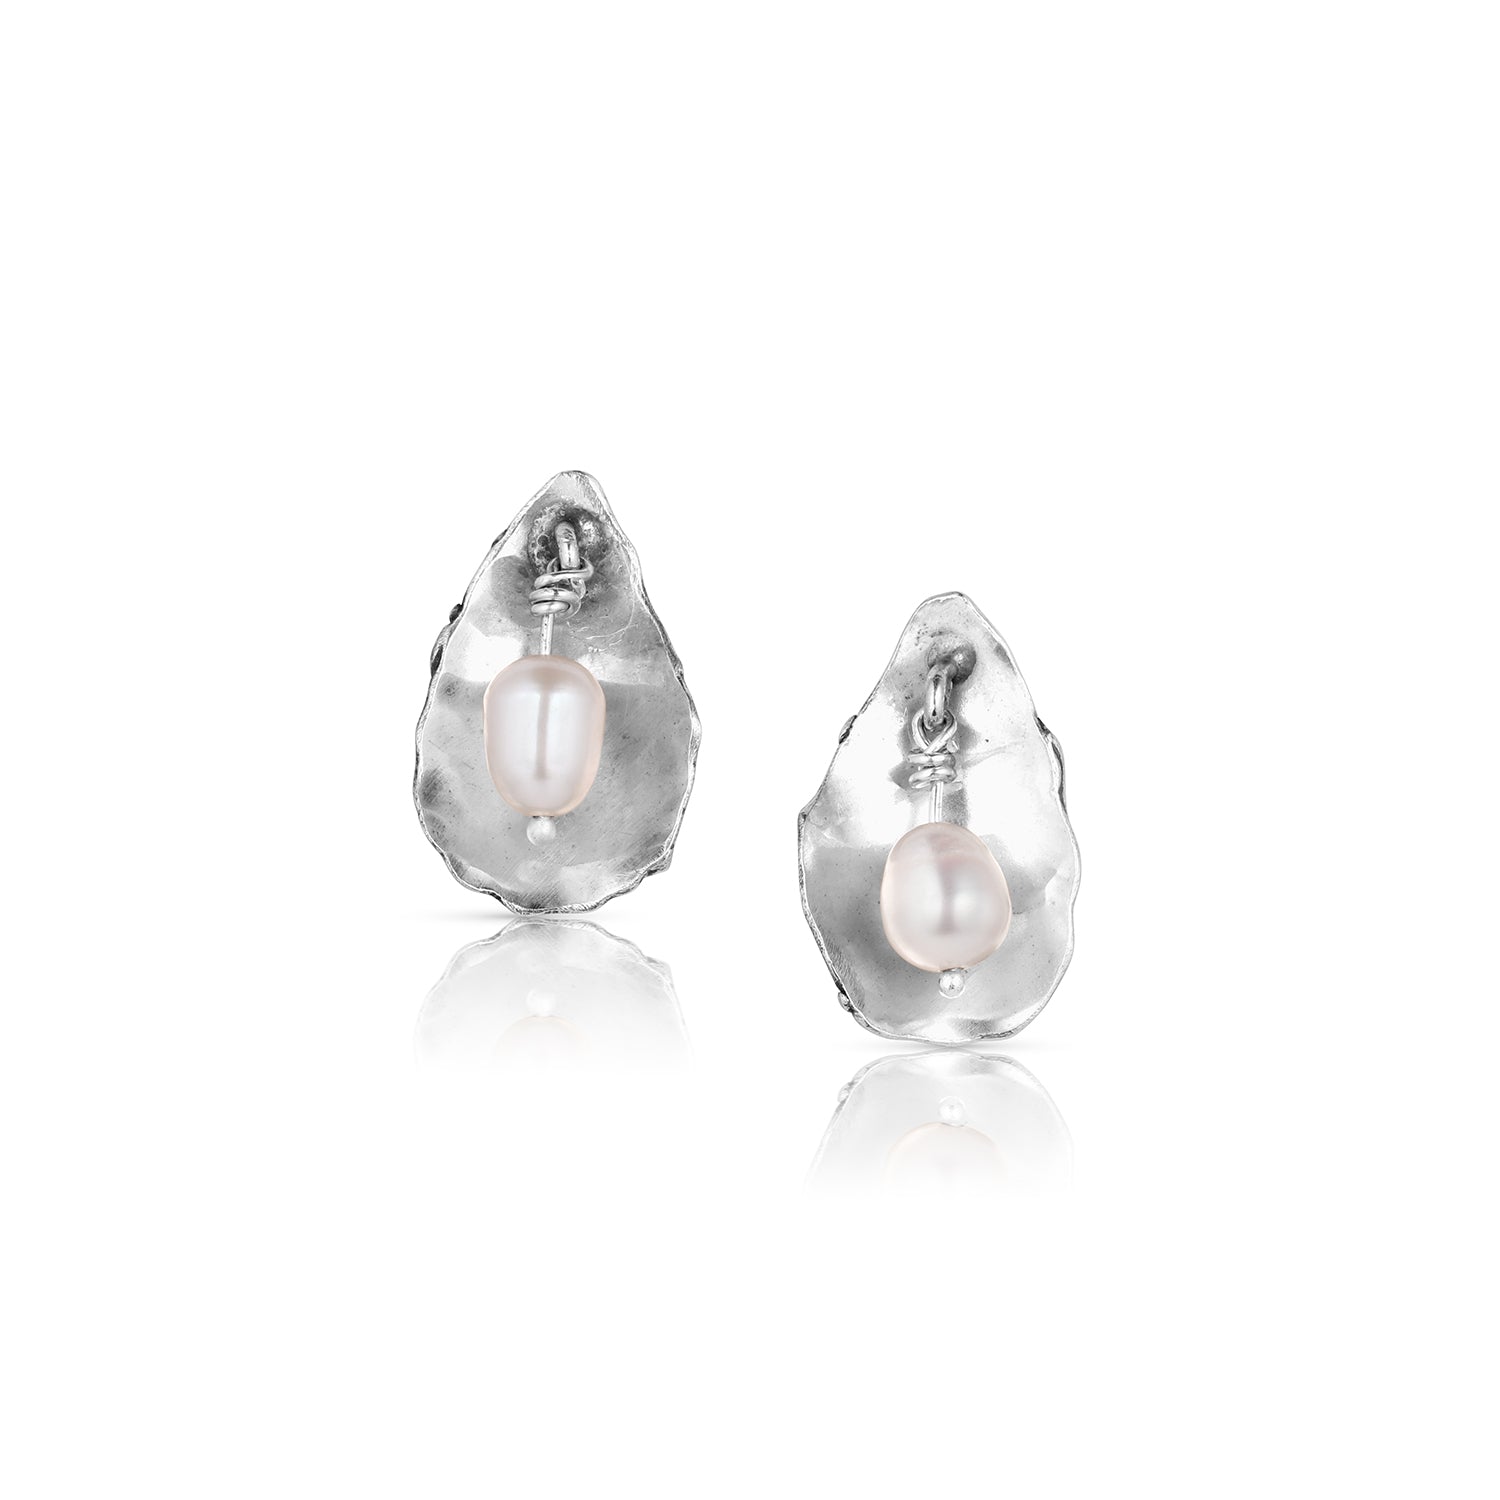 Sterling Silver Oyster Stud Earrings with 6mm Cultured Pearls